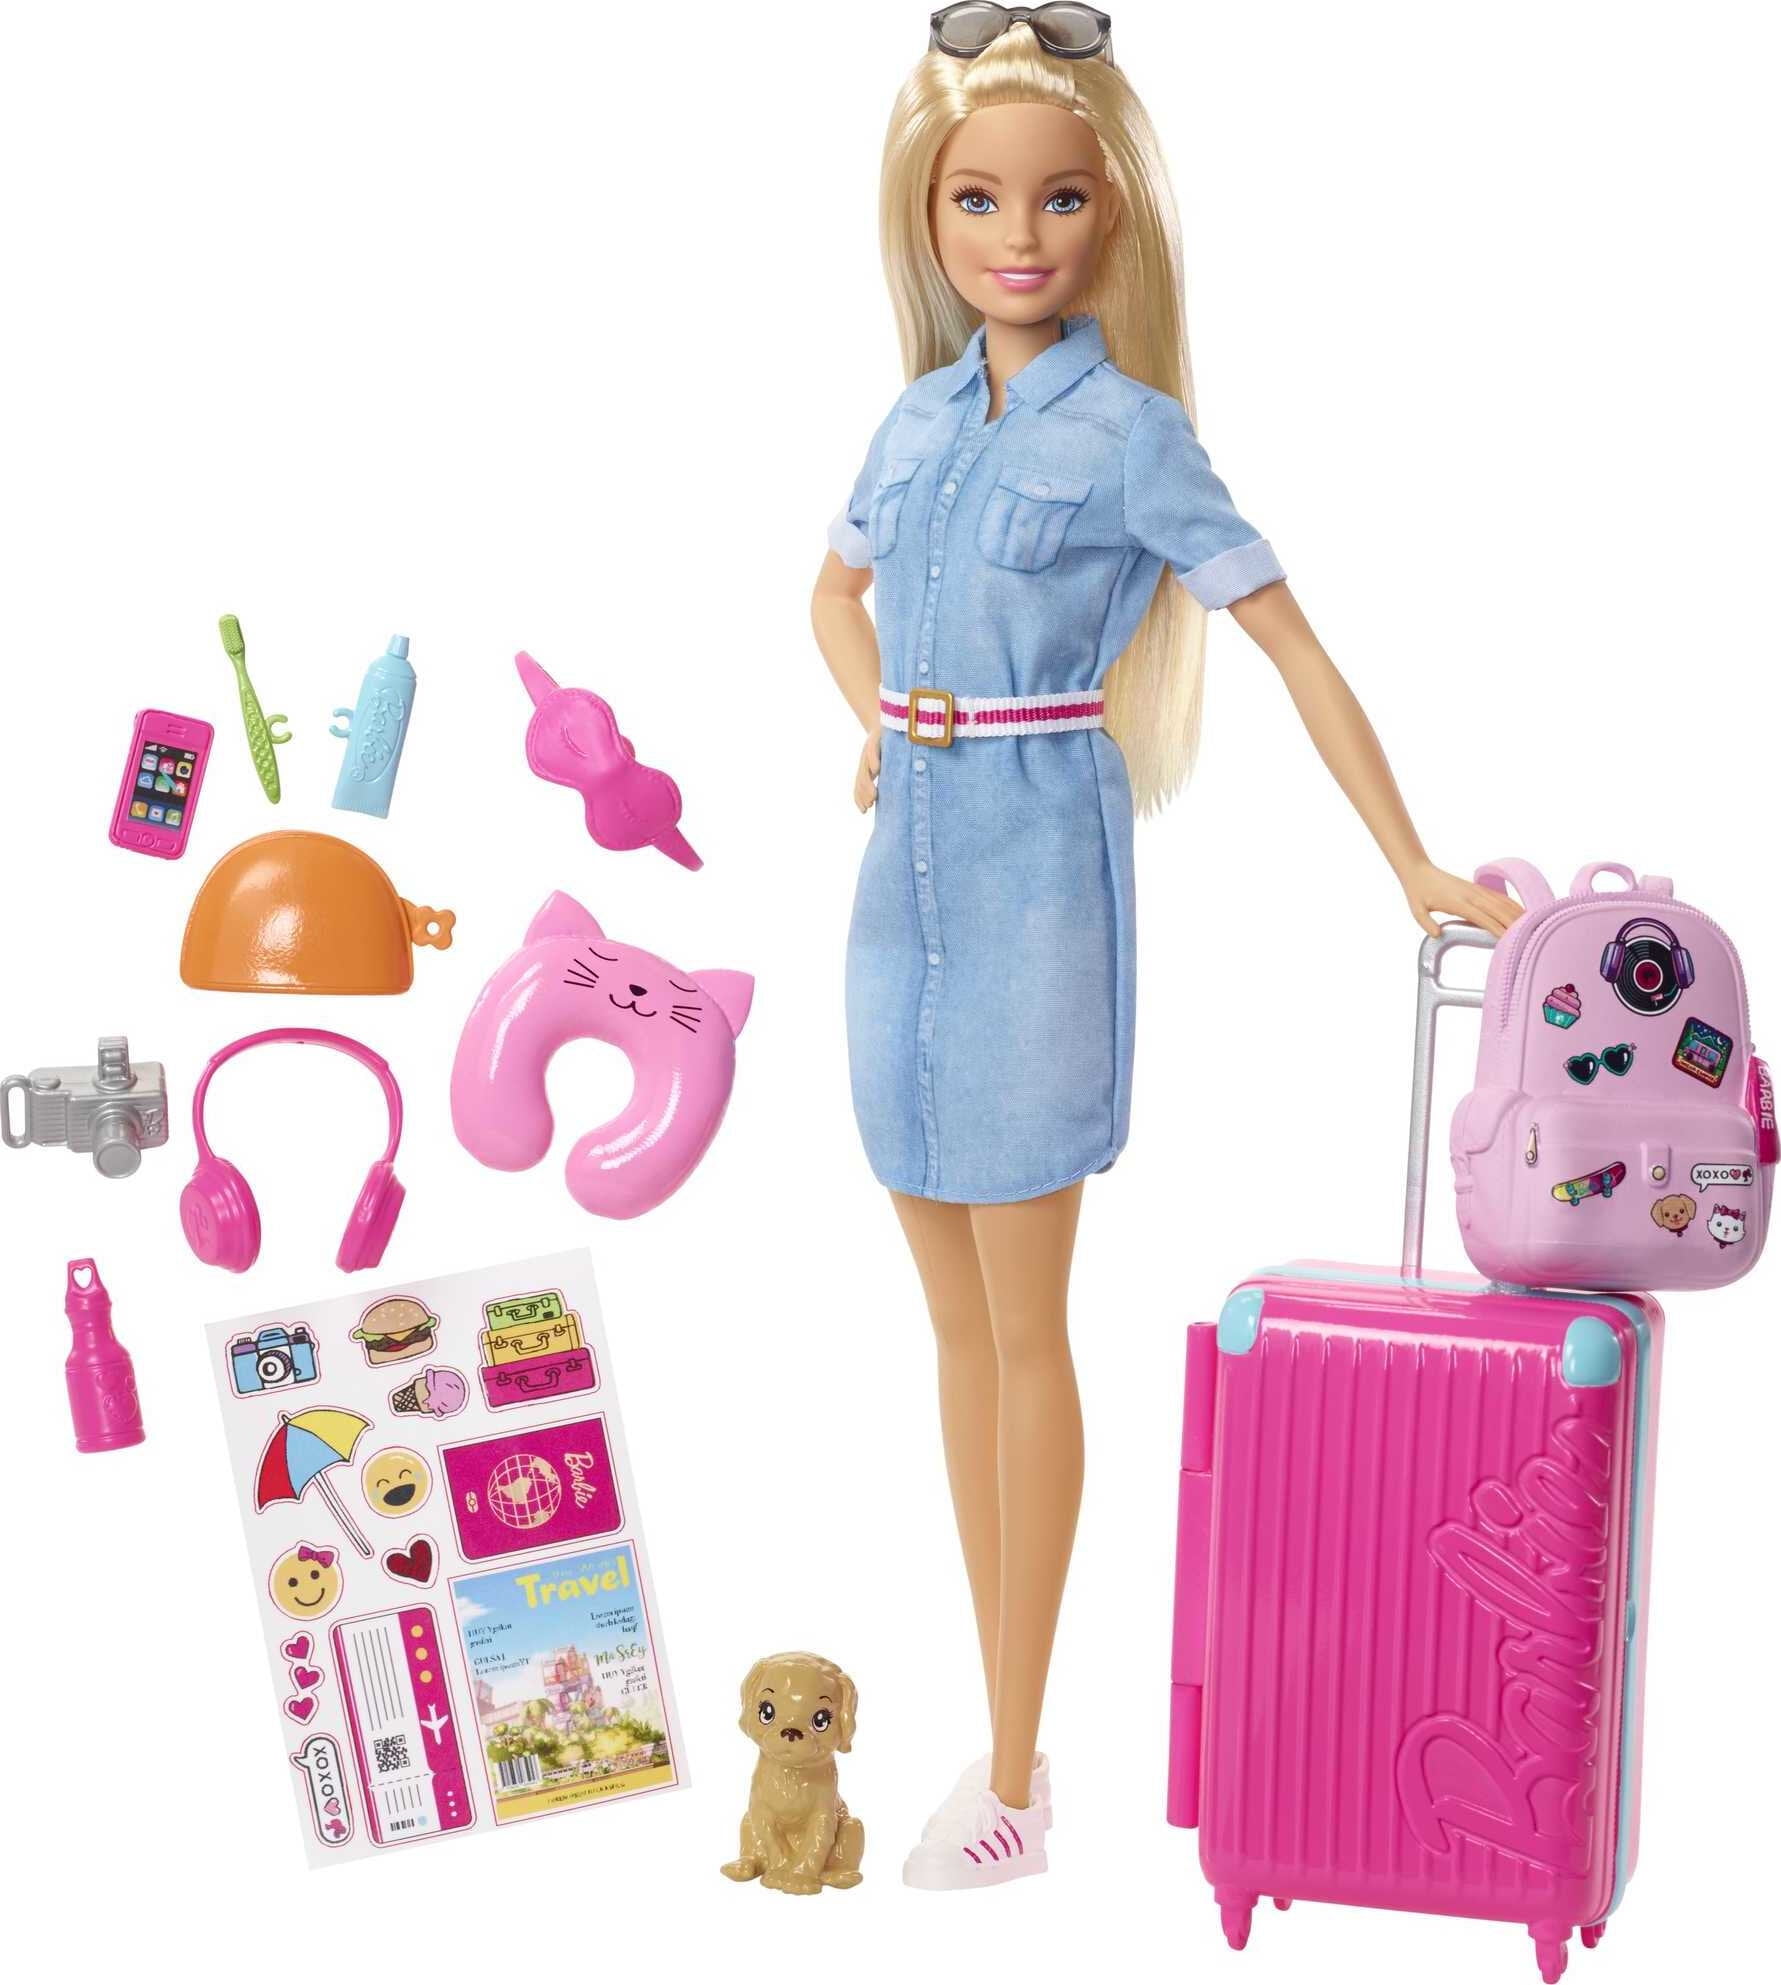 ​Barbie Travel Doll, Blonde, with Puppy, Opening Suitcase, Stickers And 10+ Accessories, for 3 to 7 Year Olds​​​